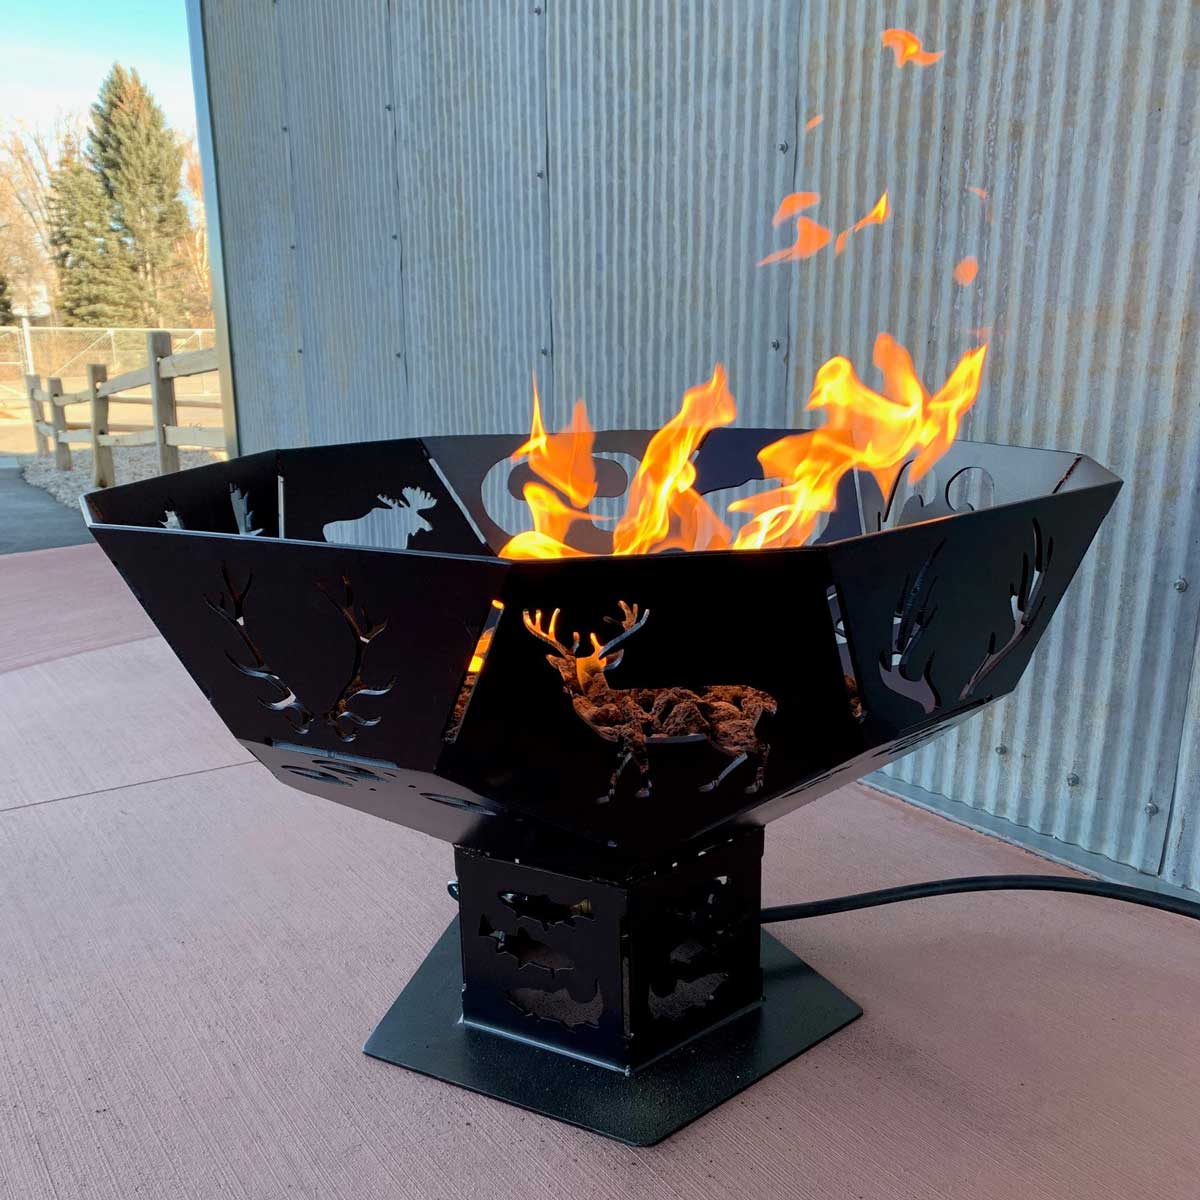 Rubidium Gear Works Fire Pit With, Warming Trends Fire Pit